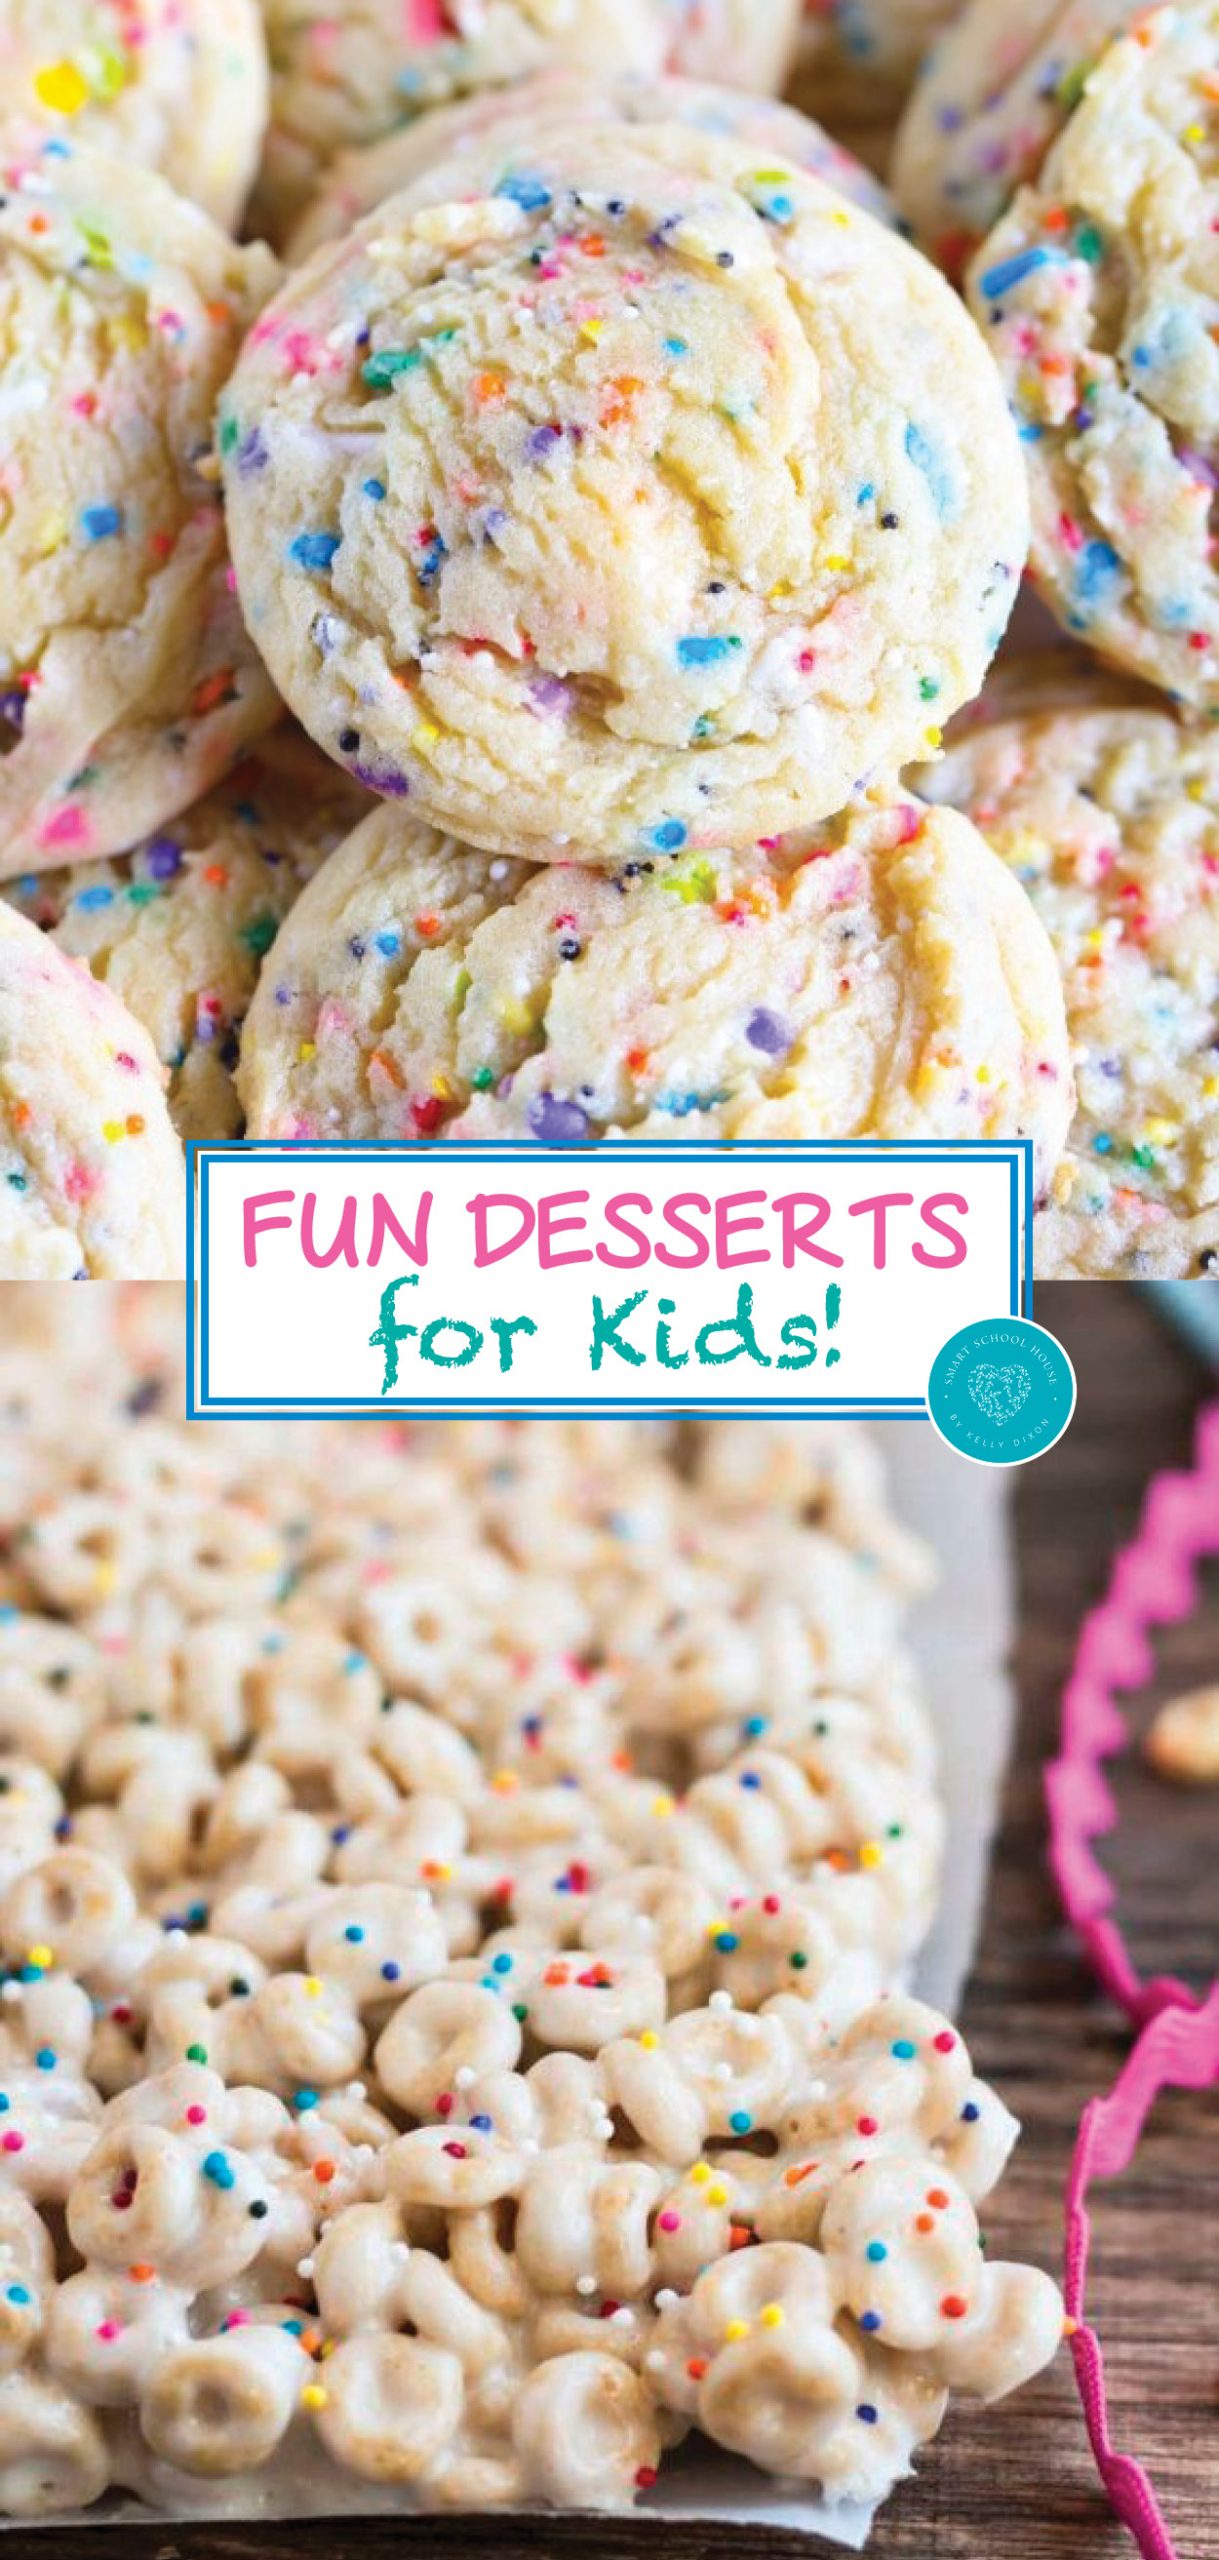 Fun Desserts for Kids - Totally Cool Desserts Every Kid LOVES!